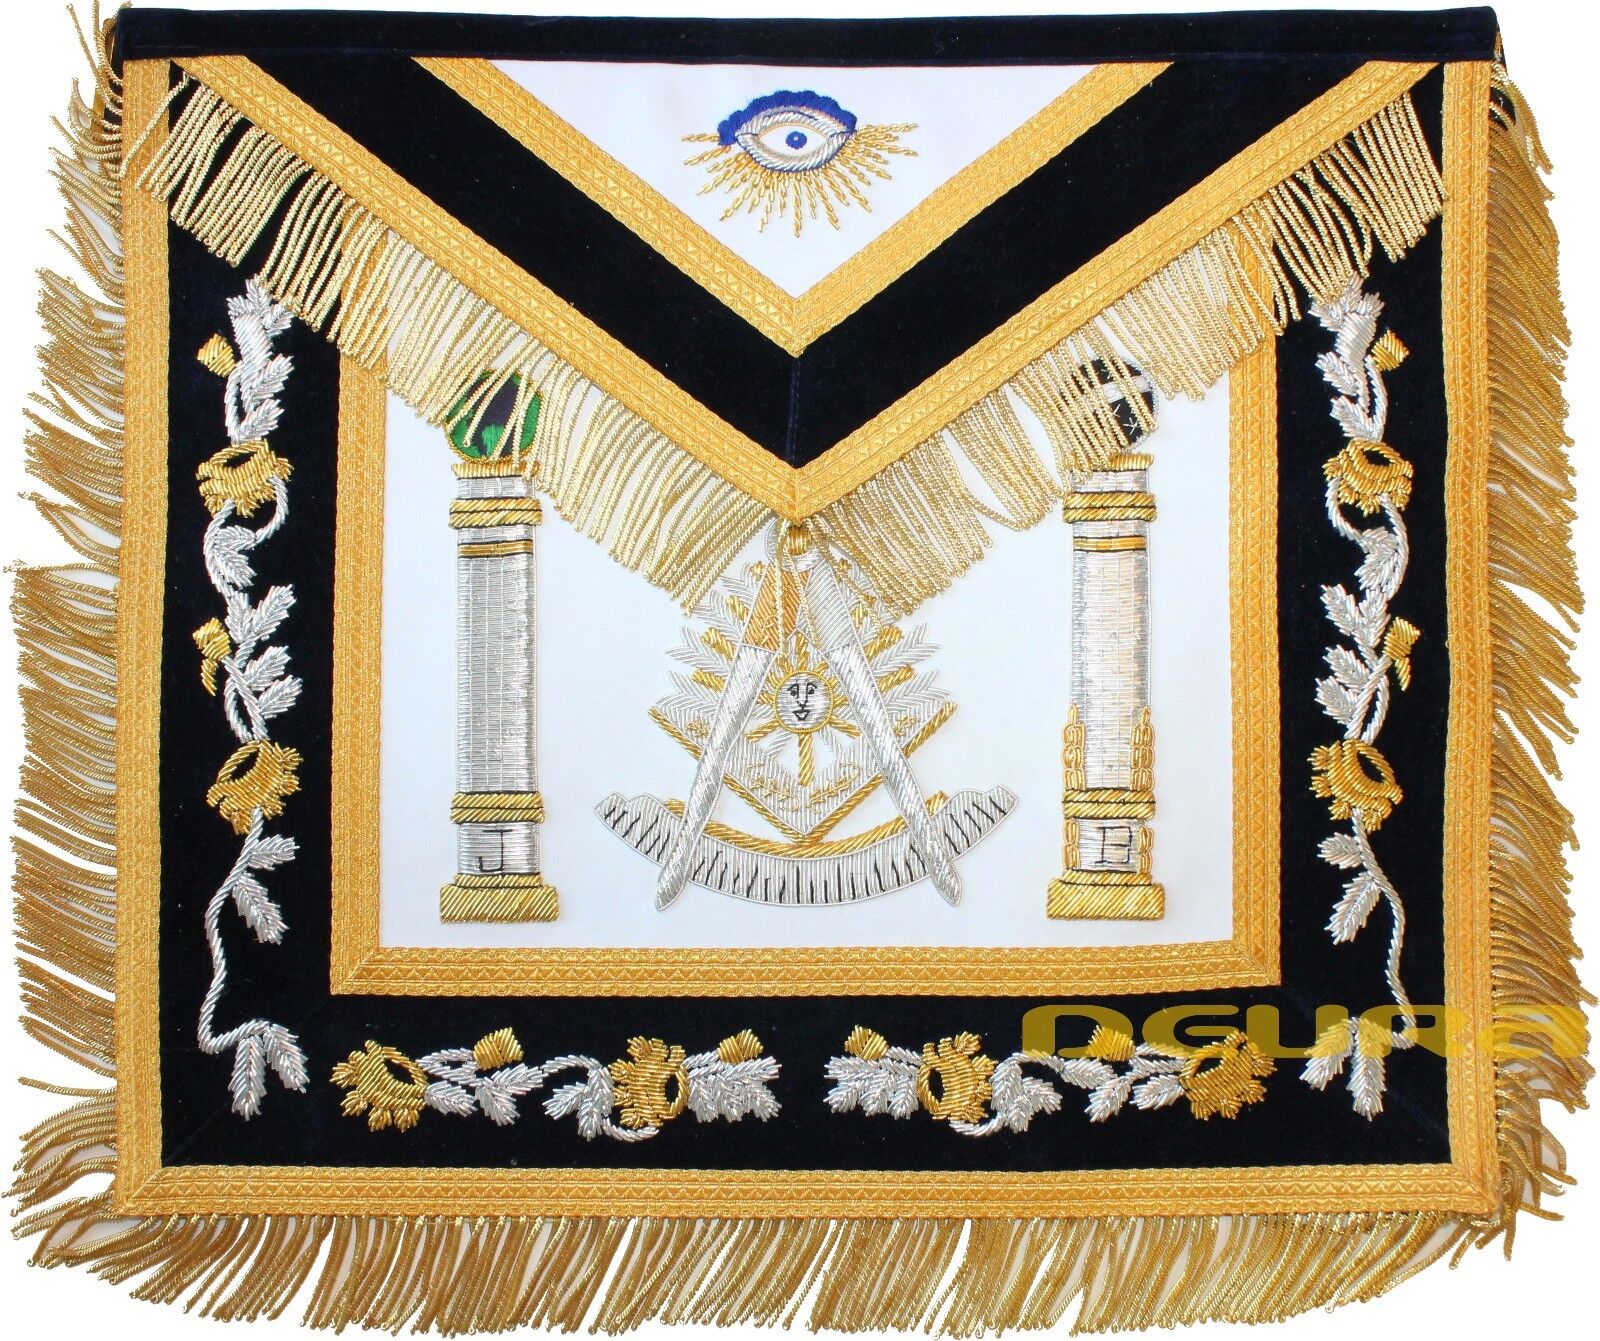 GOLDEN Hand MADE Bullion Past Master Embroidered Aprons Apron BEST QUALITY